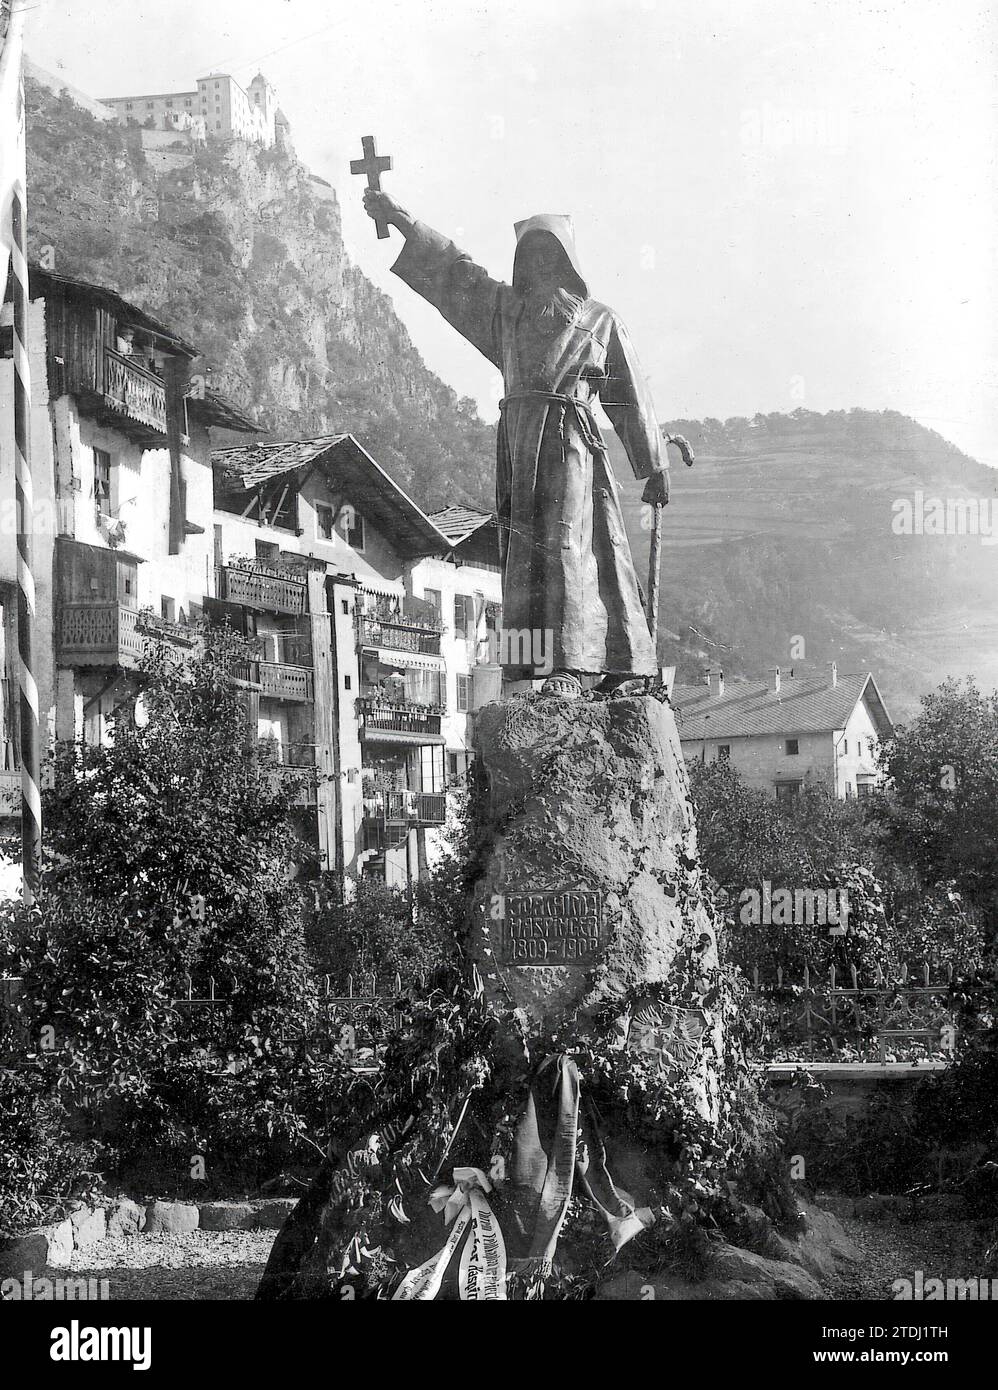 09/30/1908. The independence of Tyrol. The monument that has just been inaugurated in Klause in memory of the Capuchin friar Haspinger, the main defender of that territory against the Napoleonic invasion in 1809. Credit: Album / Archivo ABC / Charles Trampus Stock Photo